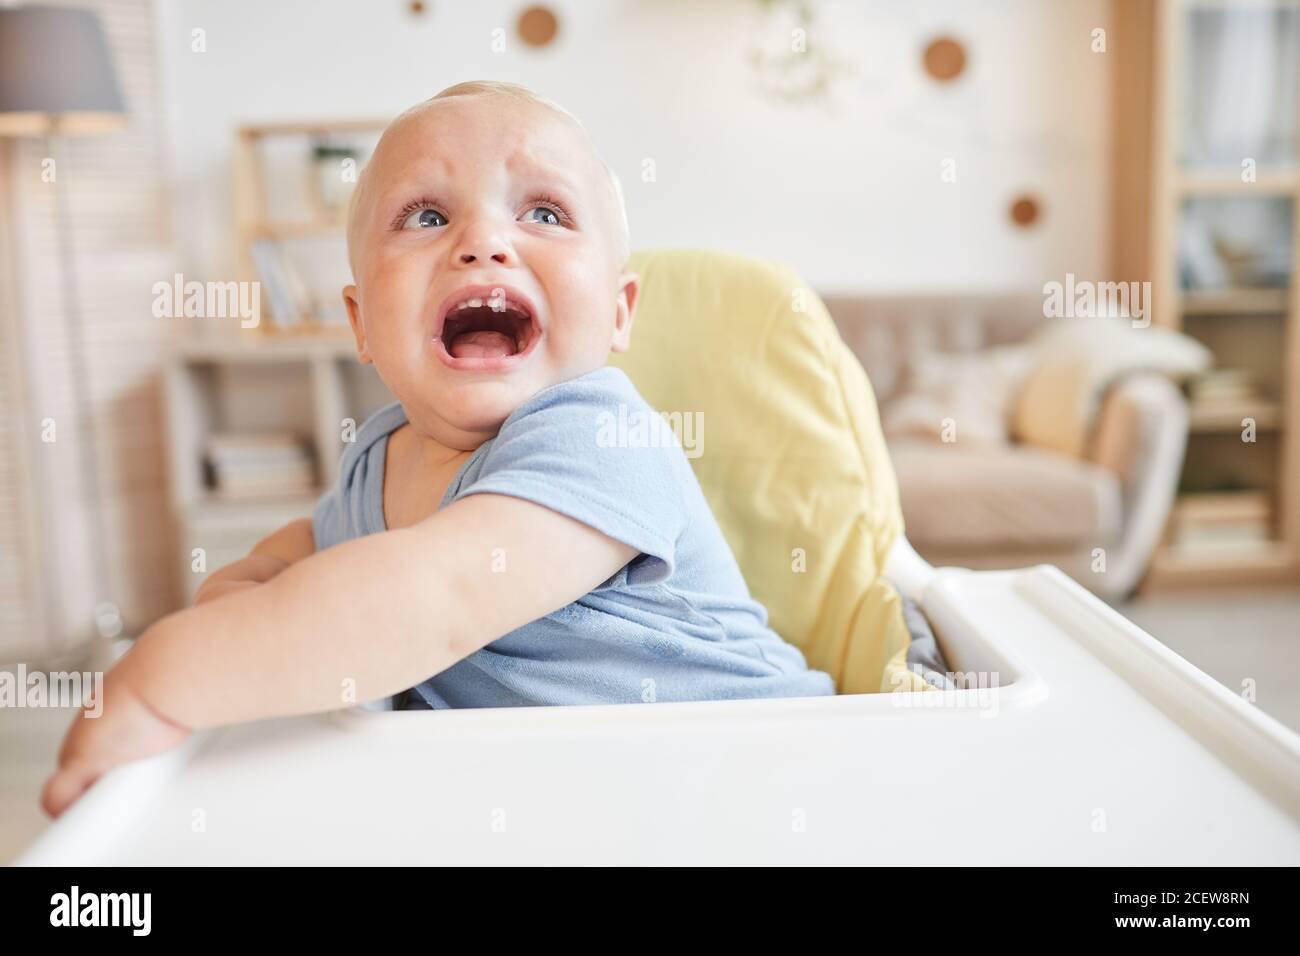 Horizontal medium close-up portrait of naughty baby boy sitting on high chair crying for something Stock Photo